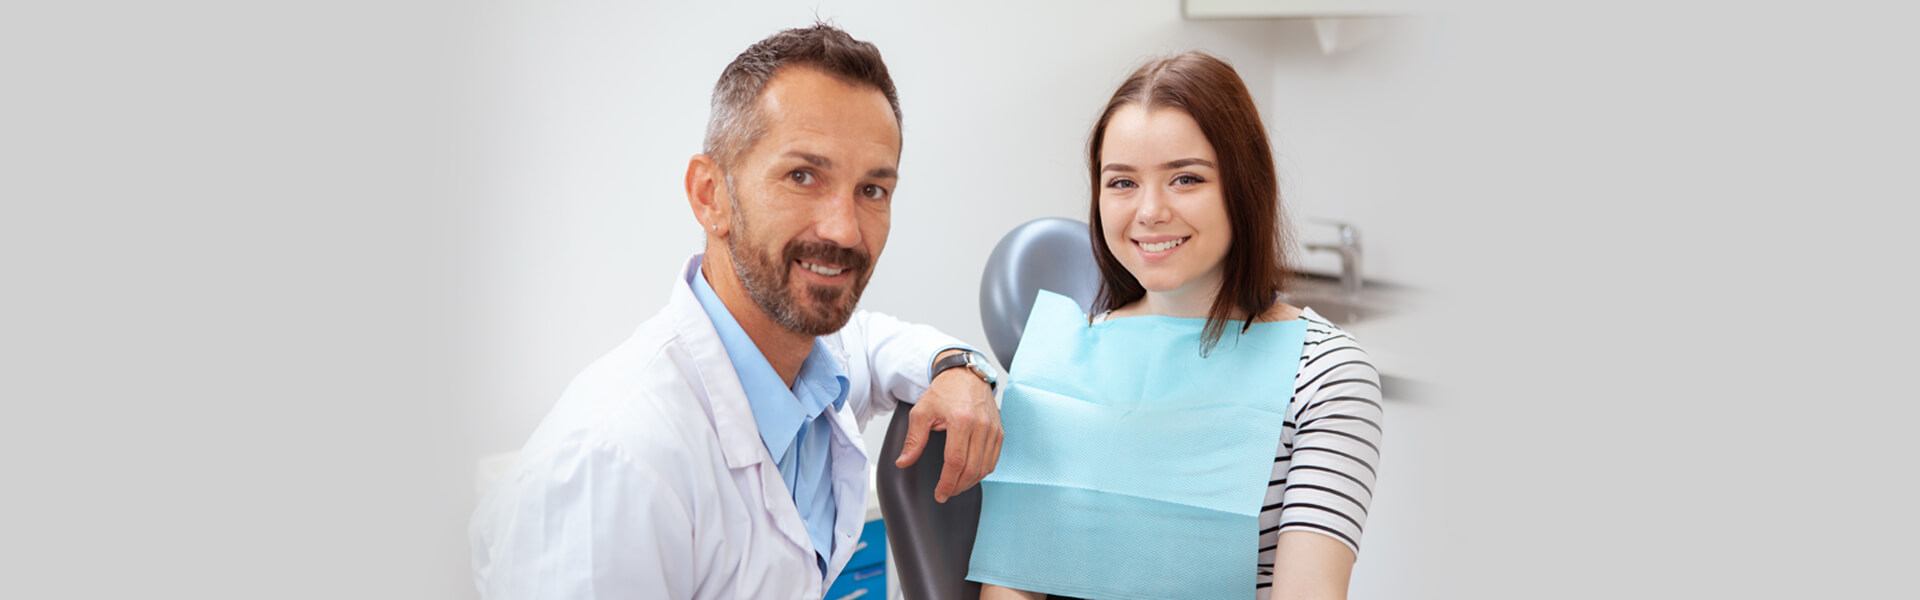 What To Look For When Choosing A New Dentist